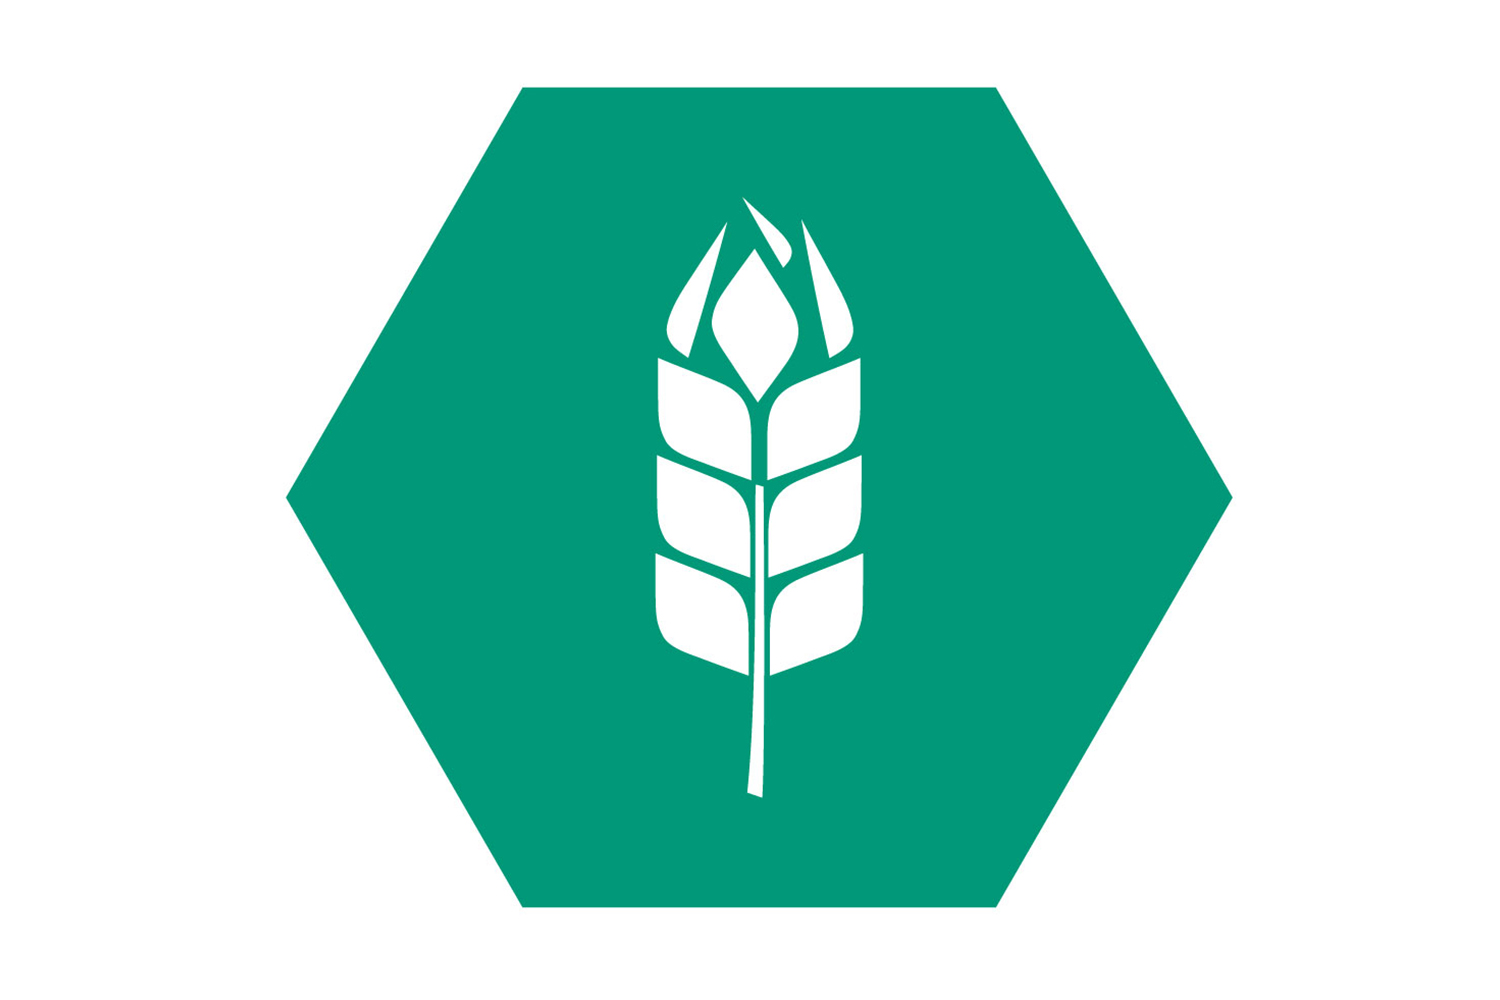 Hexagonal icon with grain ferrule represents the Food business field